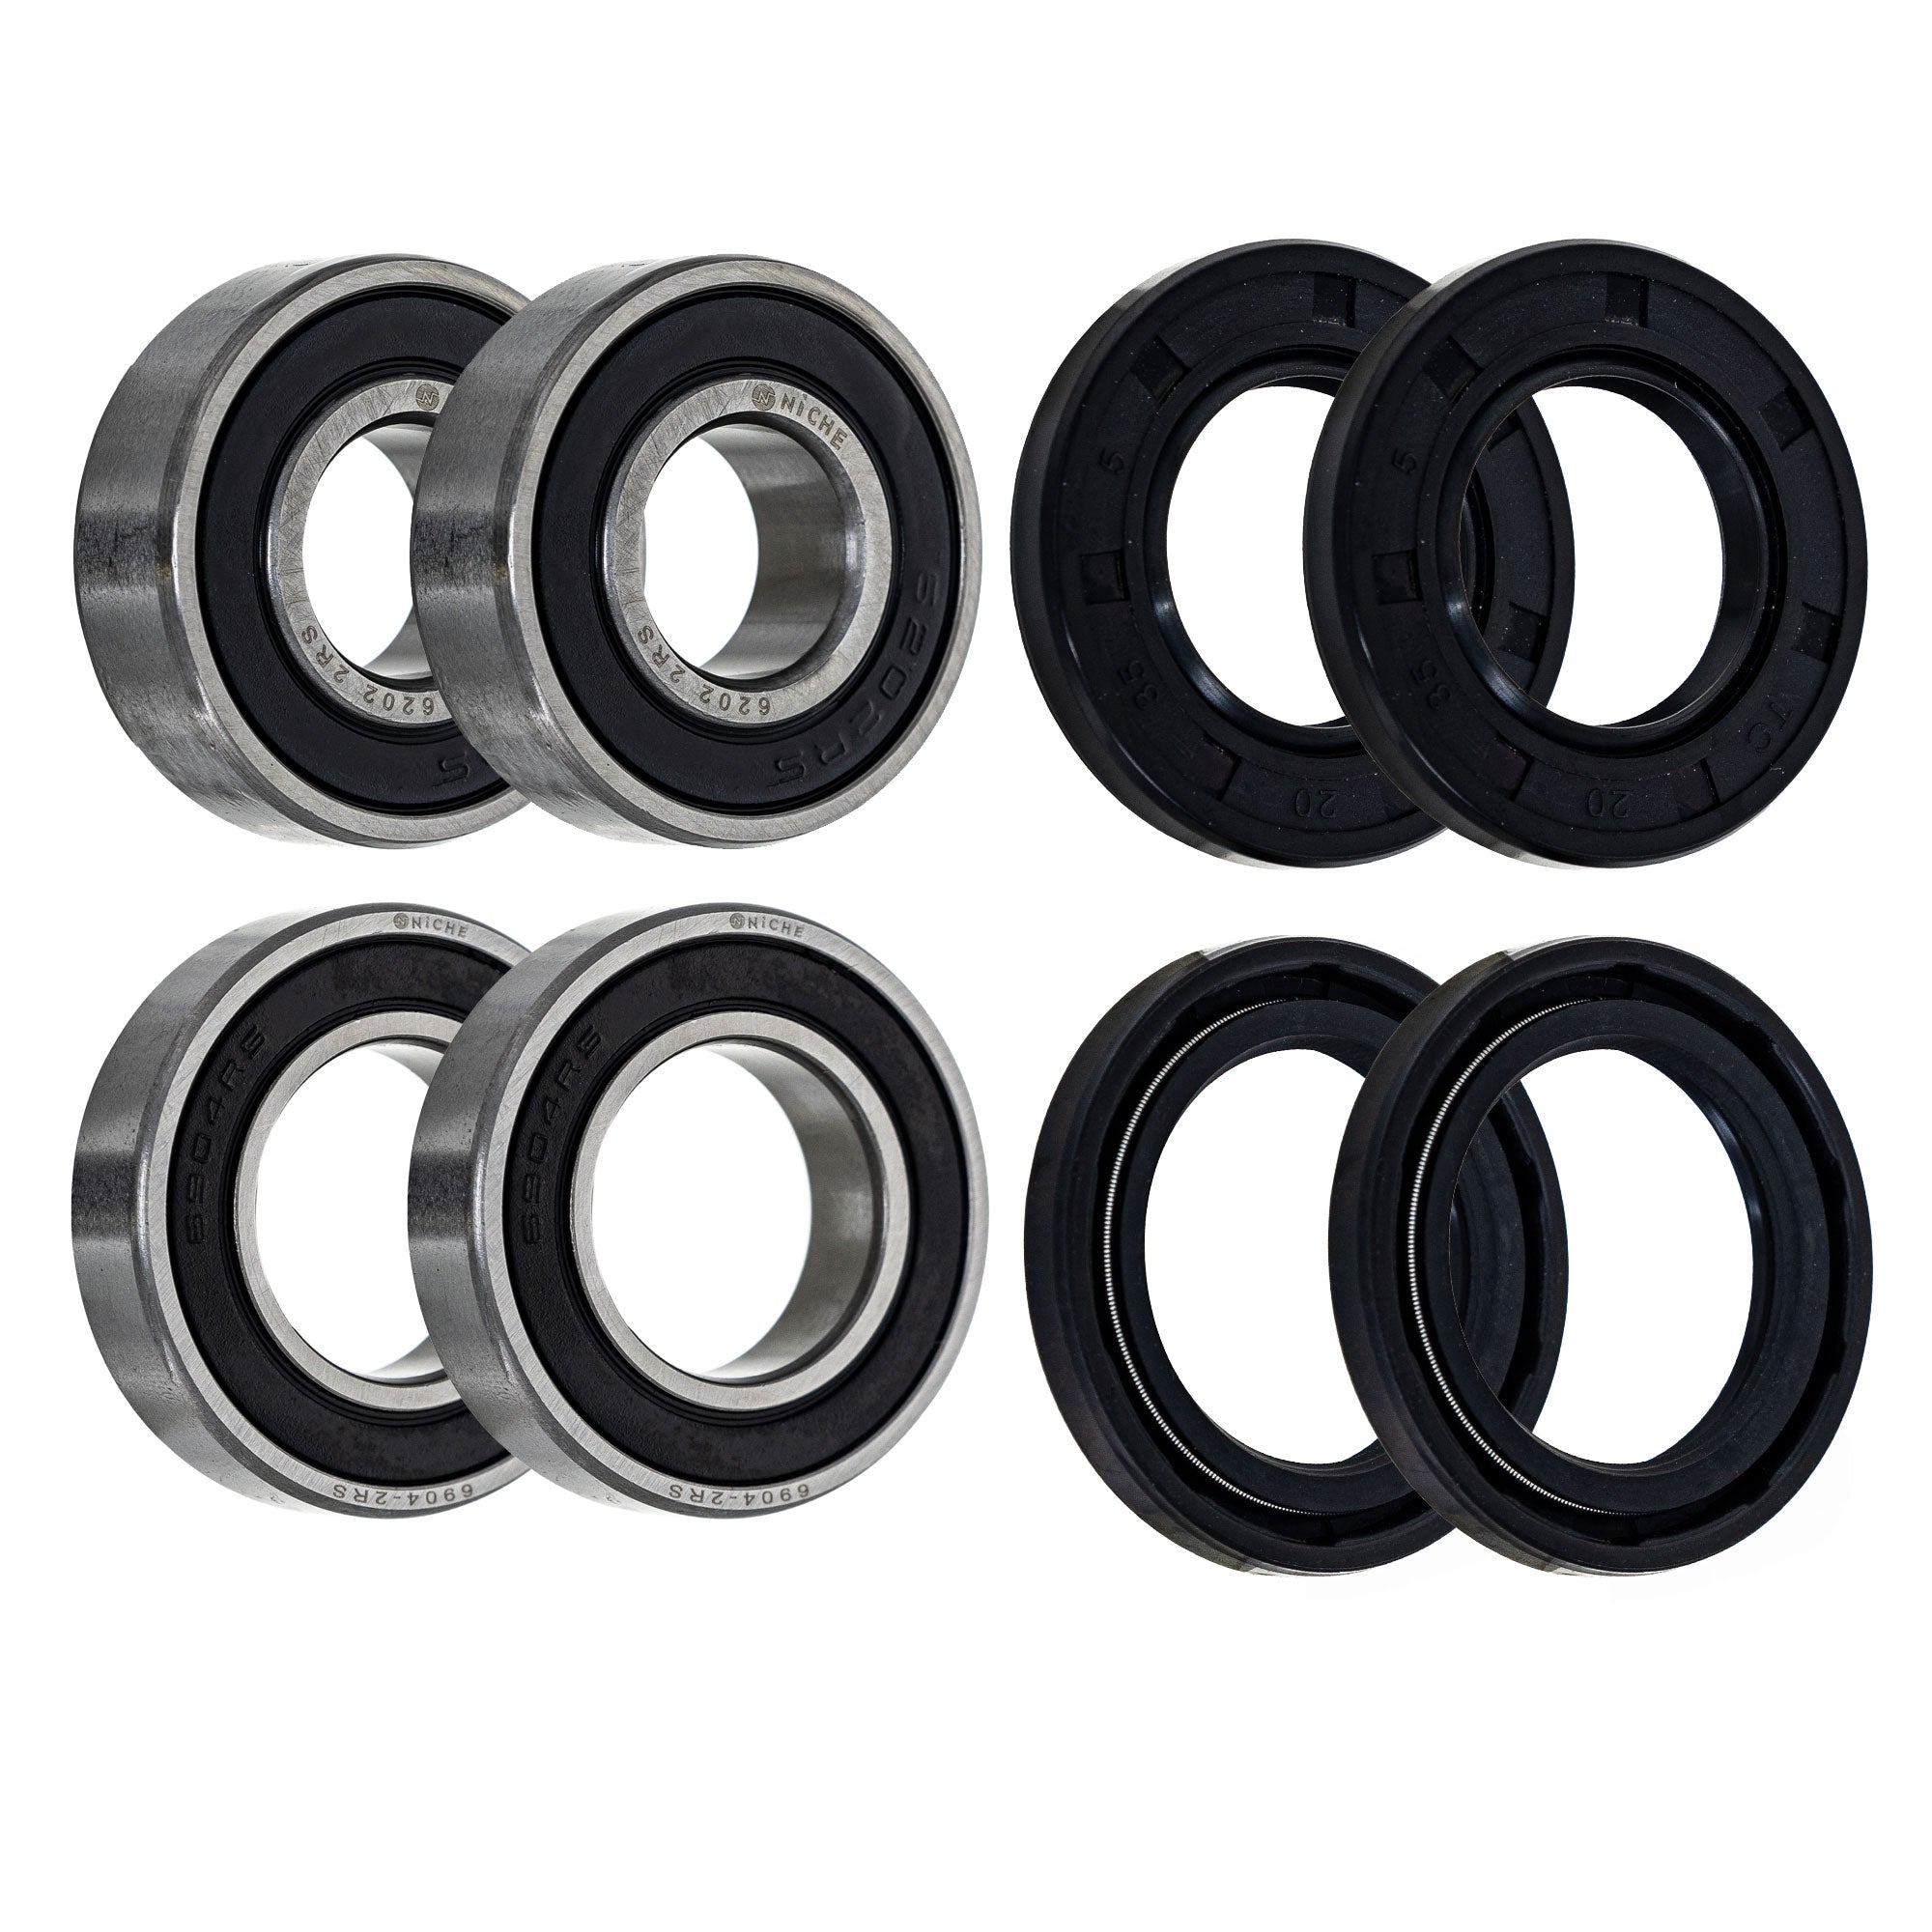 Wheel Bearing Seal Kit for zOTHER Ref No FourTrax NICHE MK1008255